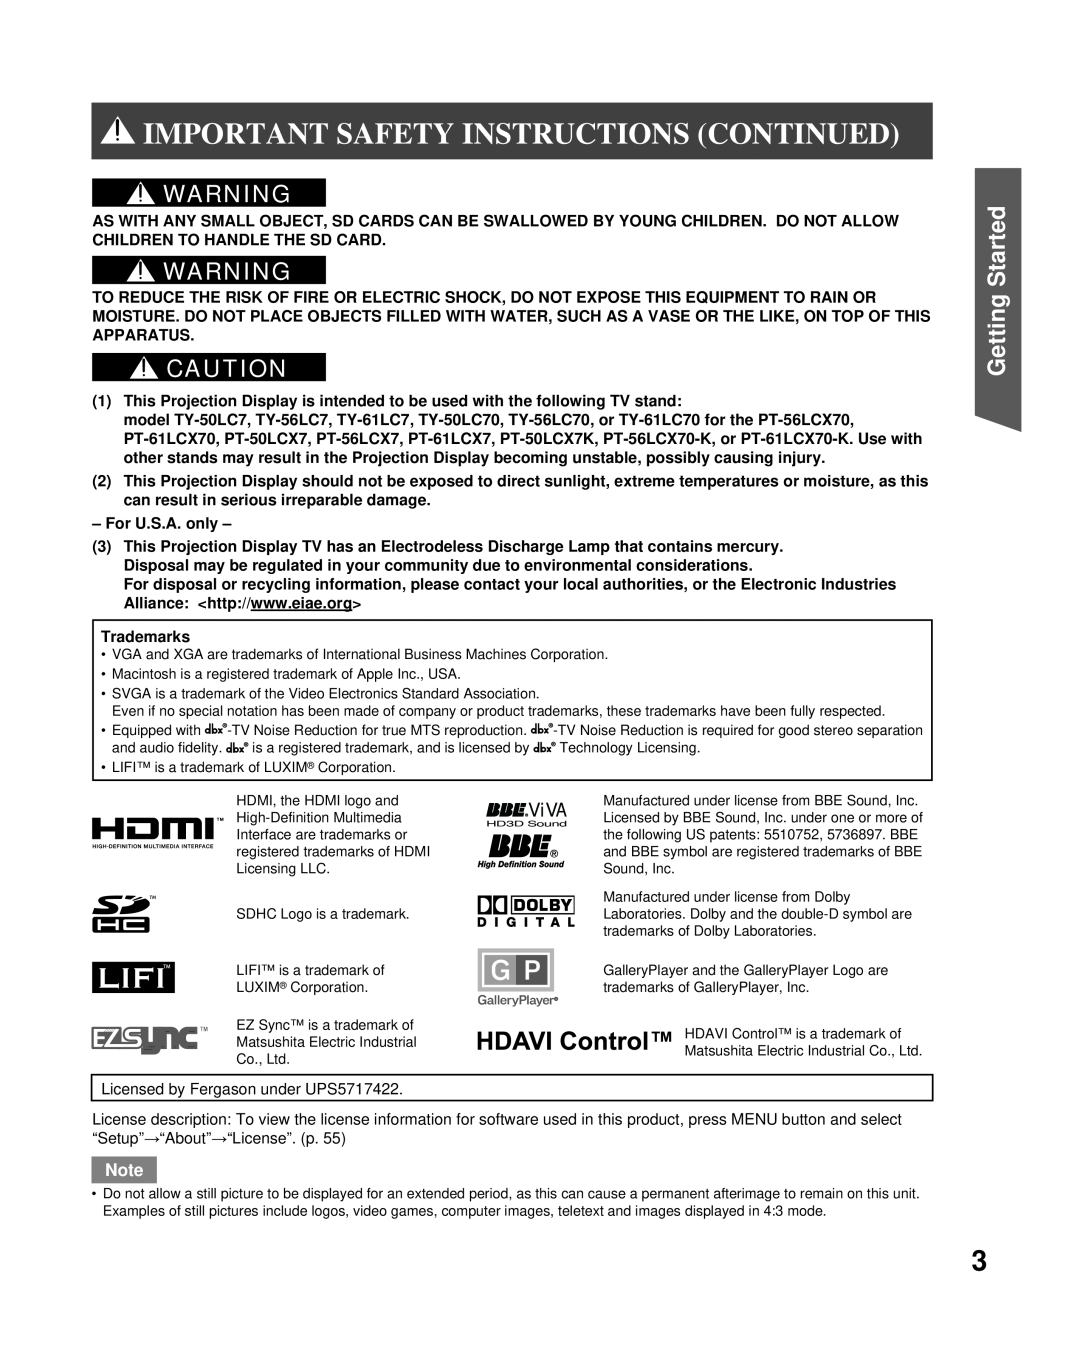 Panasonic PT-61LCX70K manual Important Safety Instructions Continued, Getting Started, ViVA, For U.S.A. only, Trademarks 